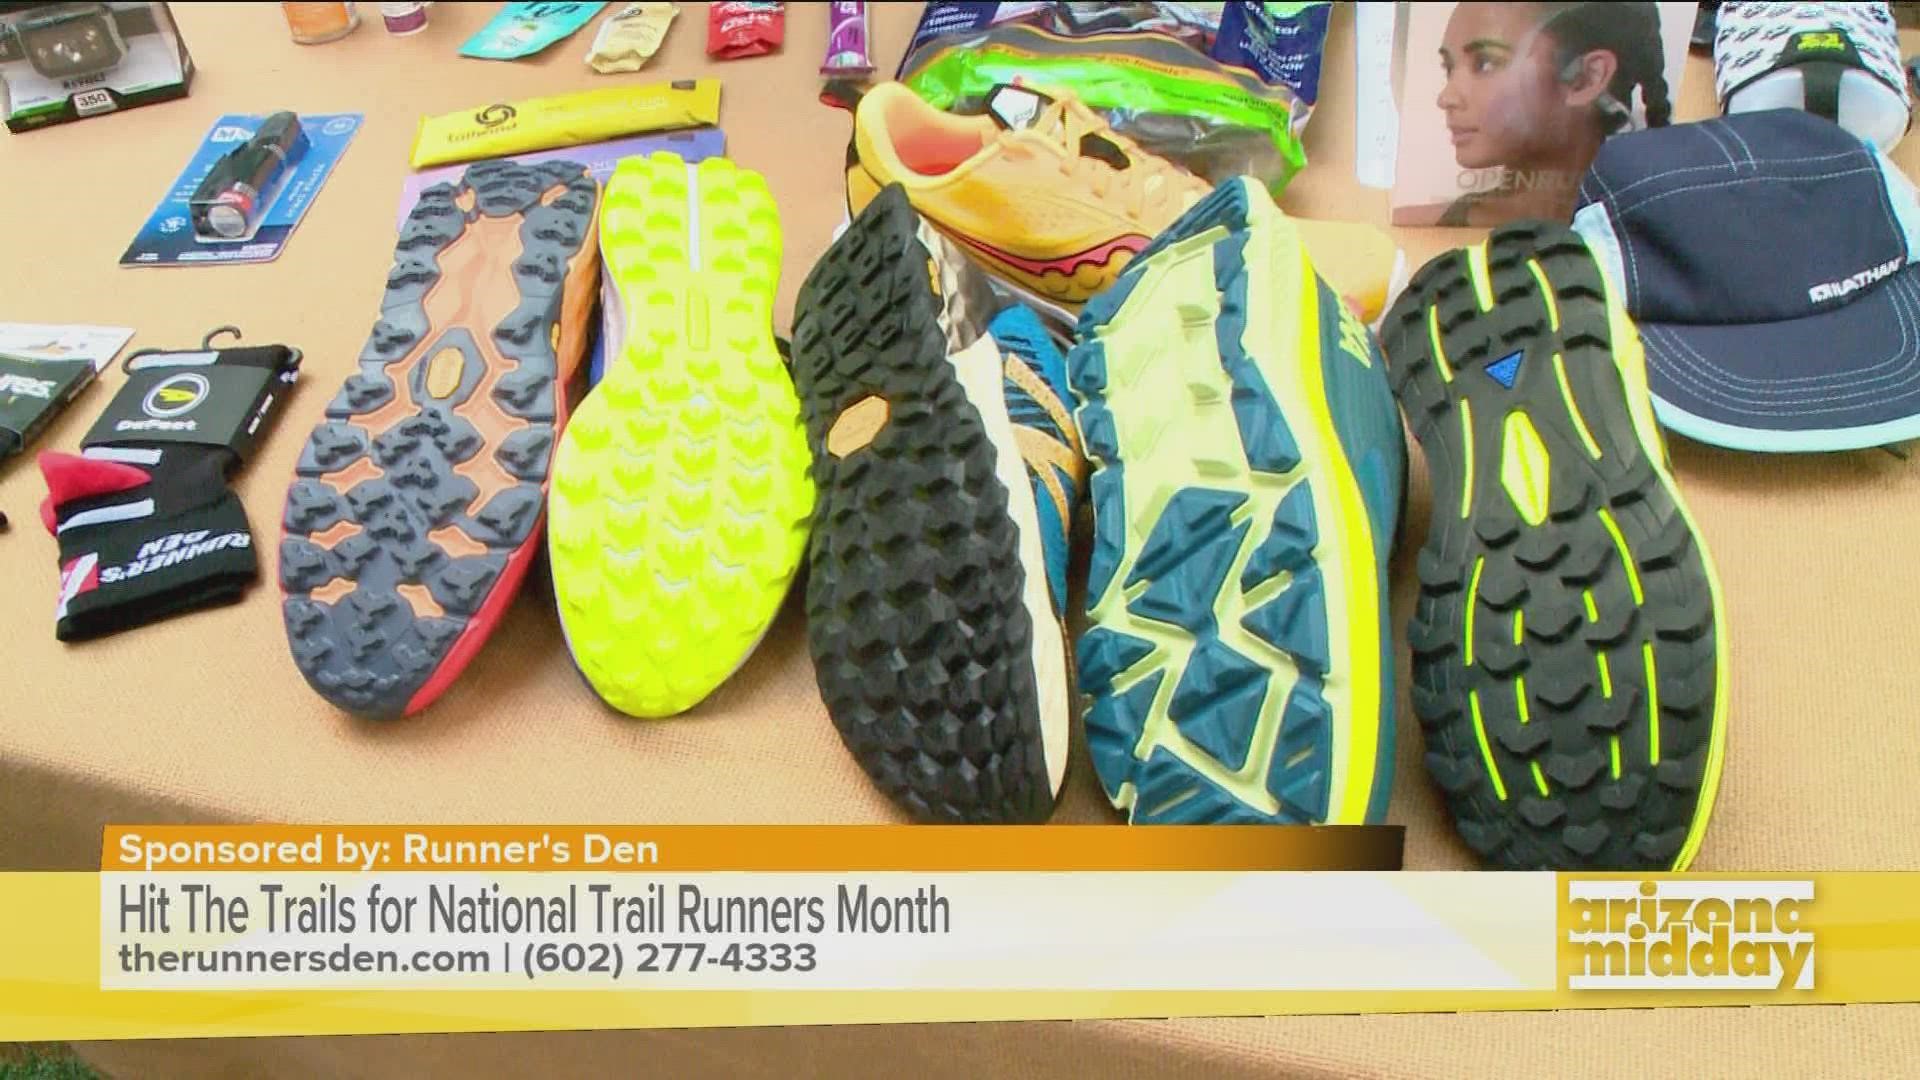 Ron French, with Runner's Den, gives us a look at the different shoes & gear that are a must before hitting the trails for a run